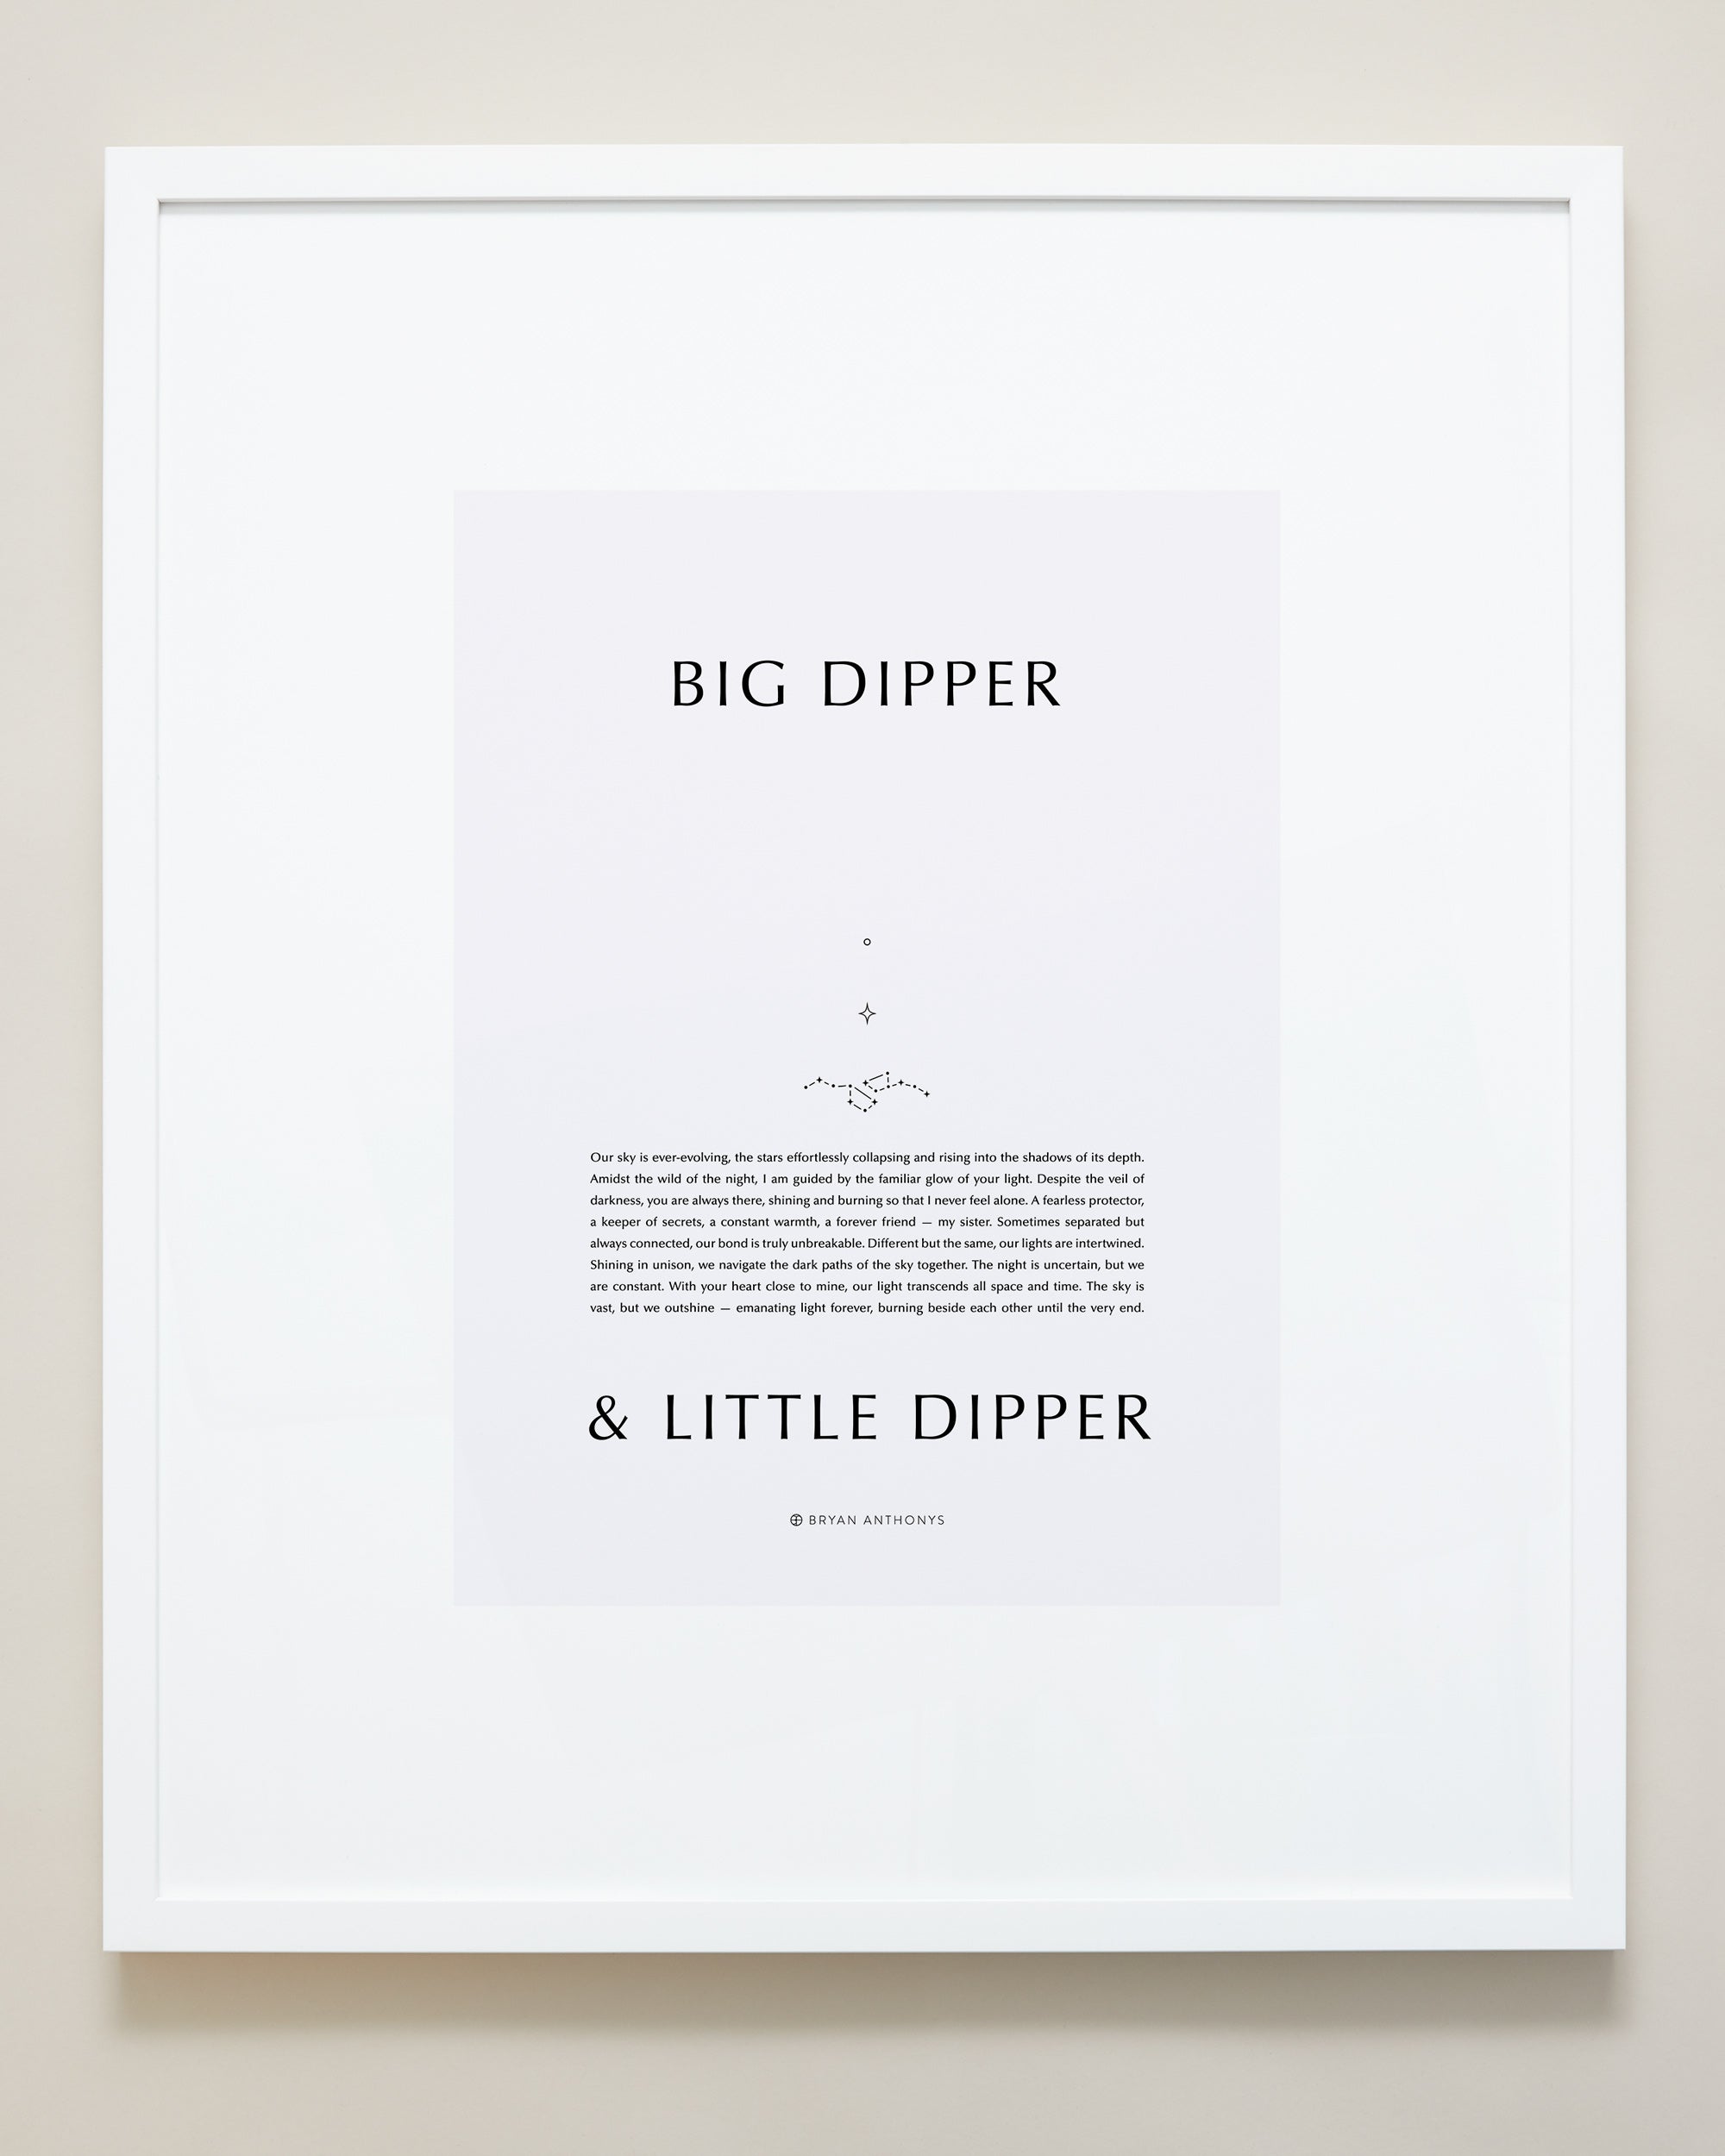 Bryan Anthonys Home Decor Purposeful Prints Big Dipper & Little Dipper Iconic Framed Print Gray Art With White Frame 20x24